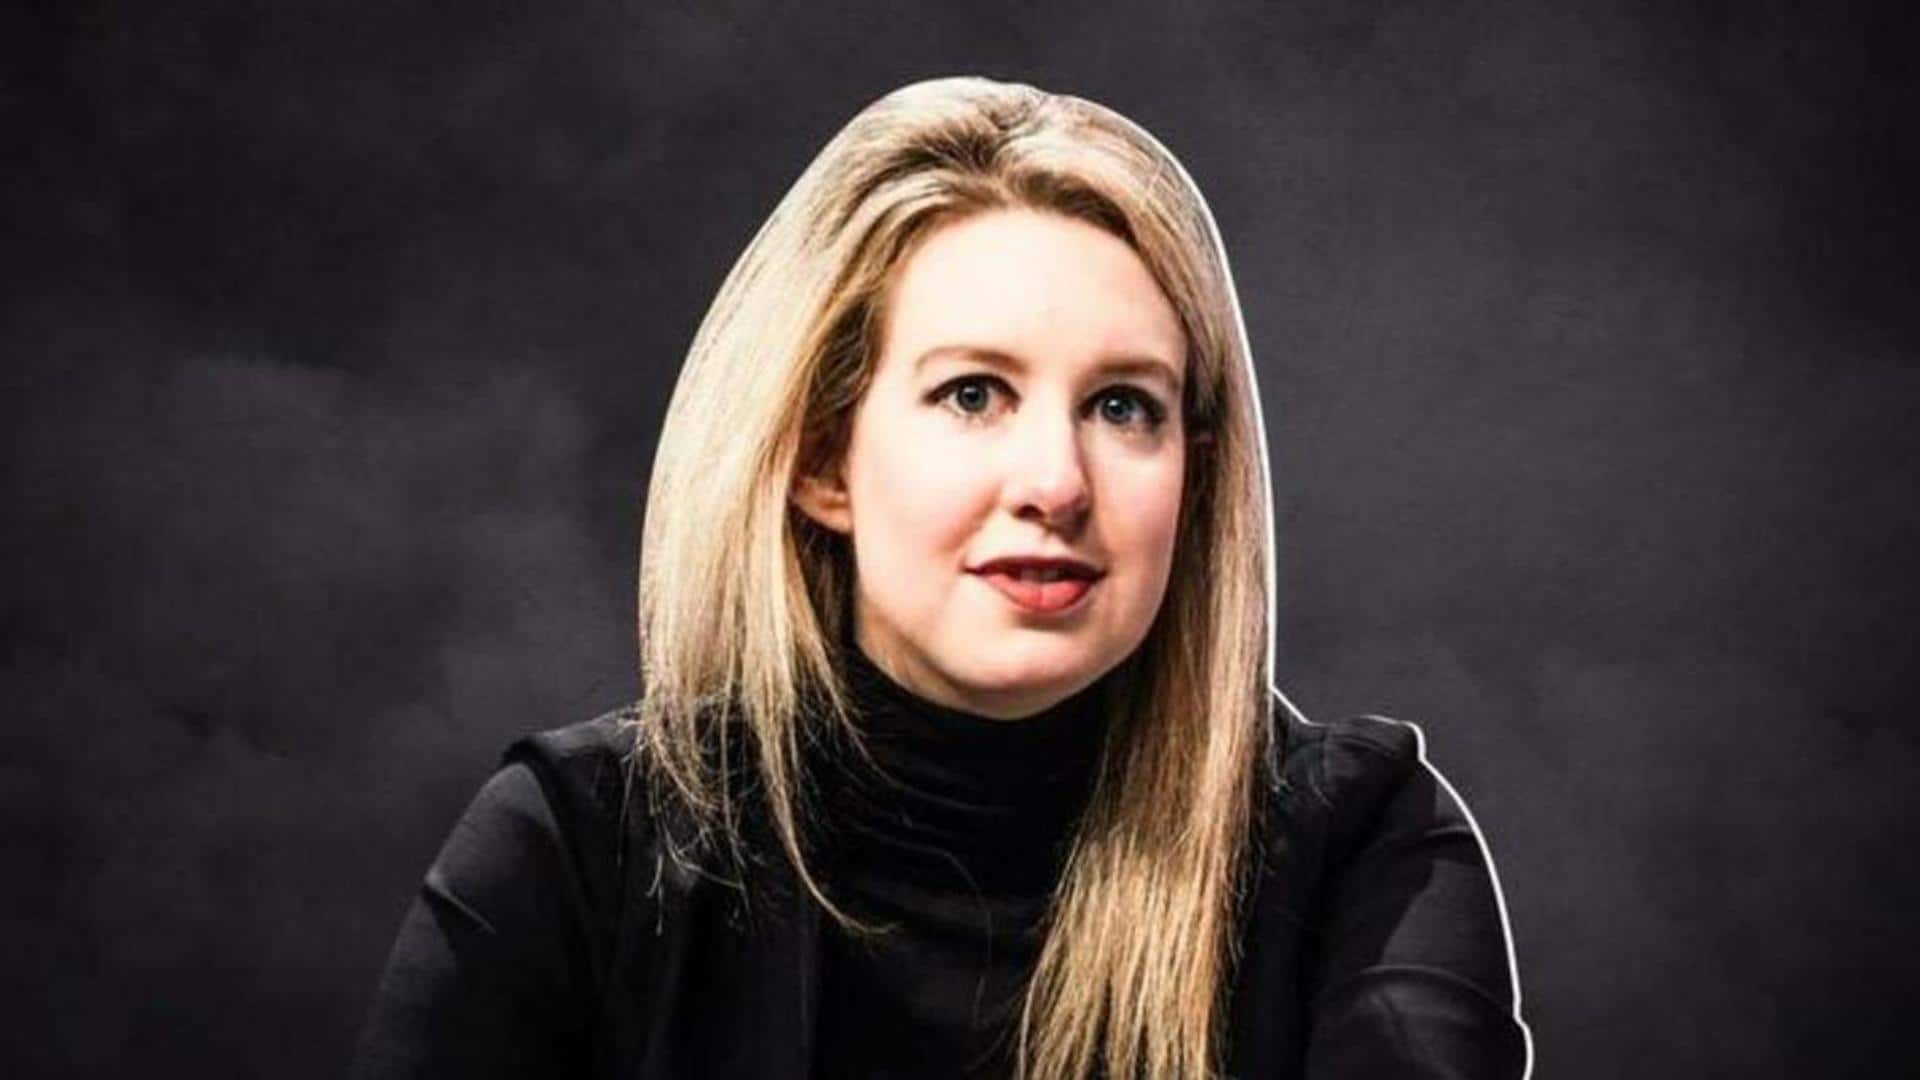 Theranos founder Elizabeth Holmes sentenced to 11+ years in prison